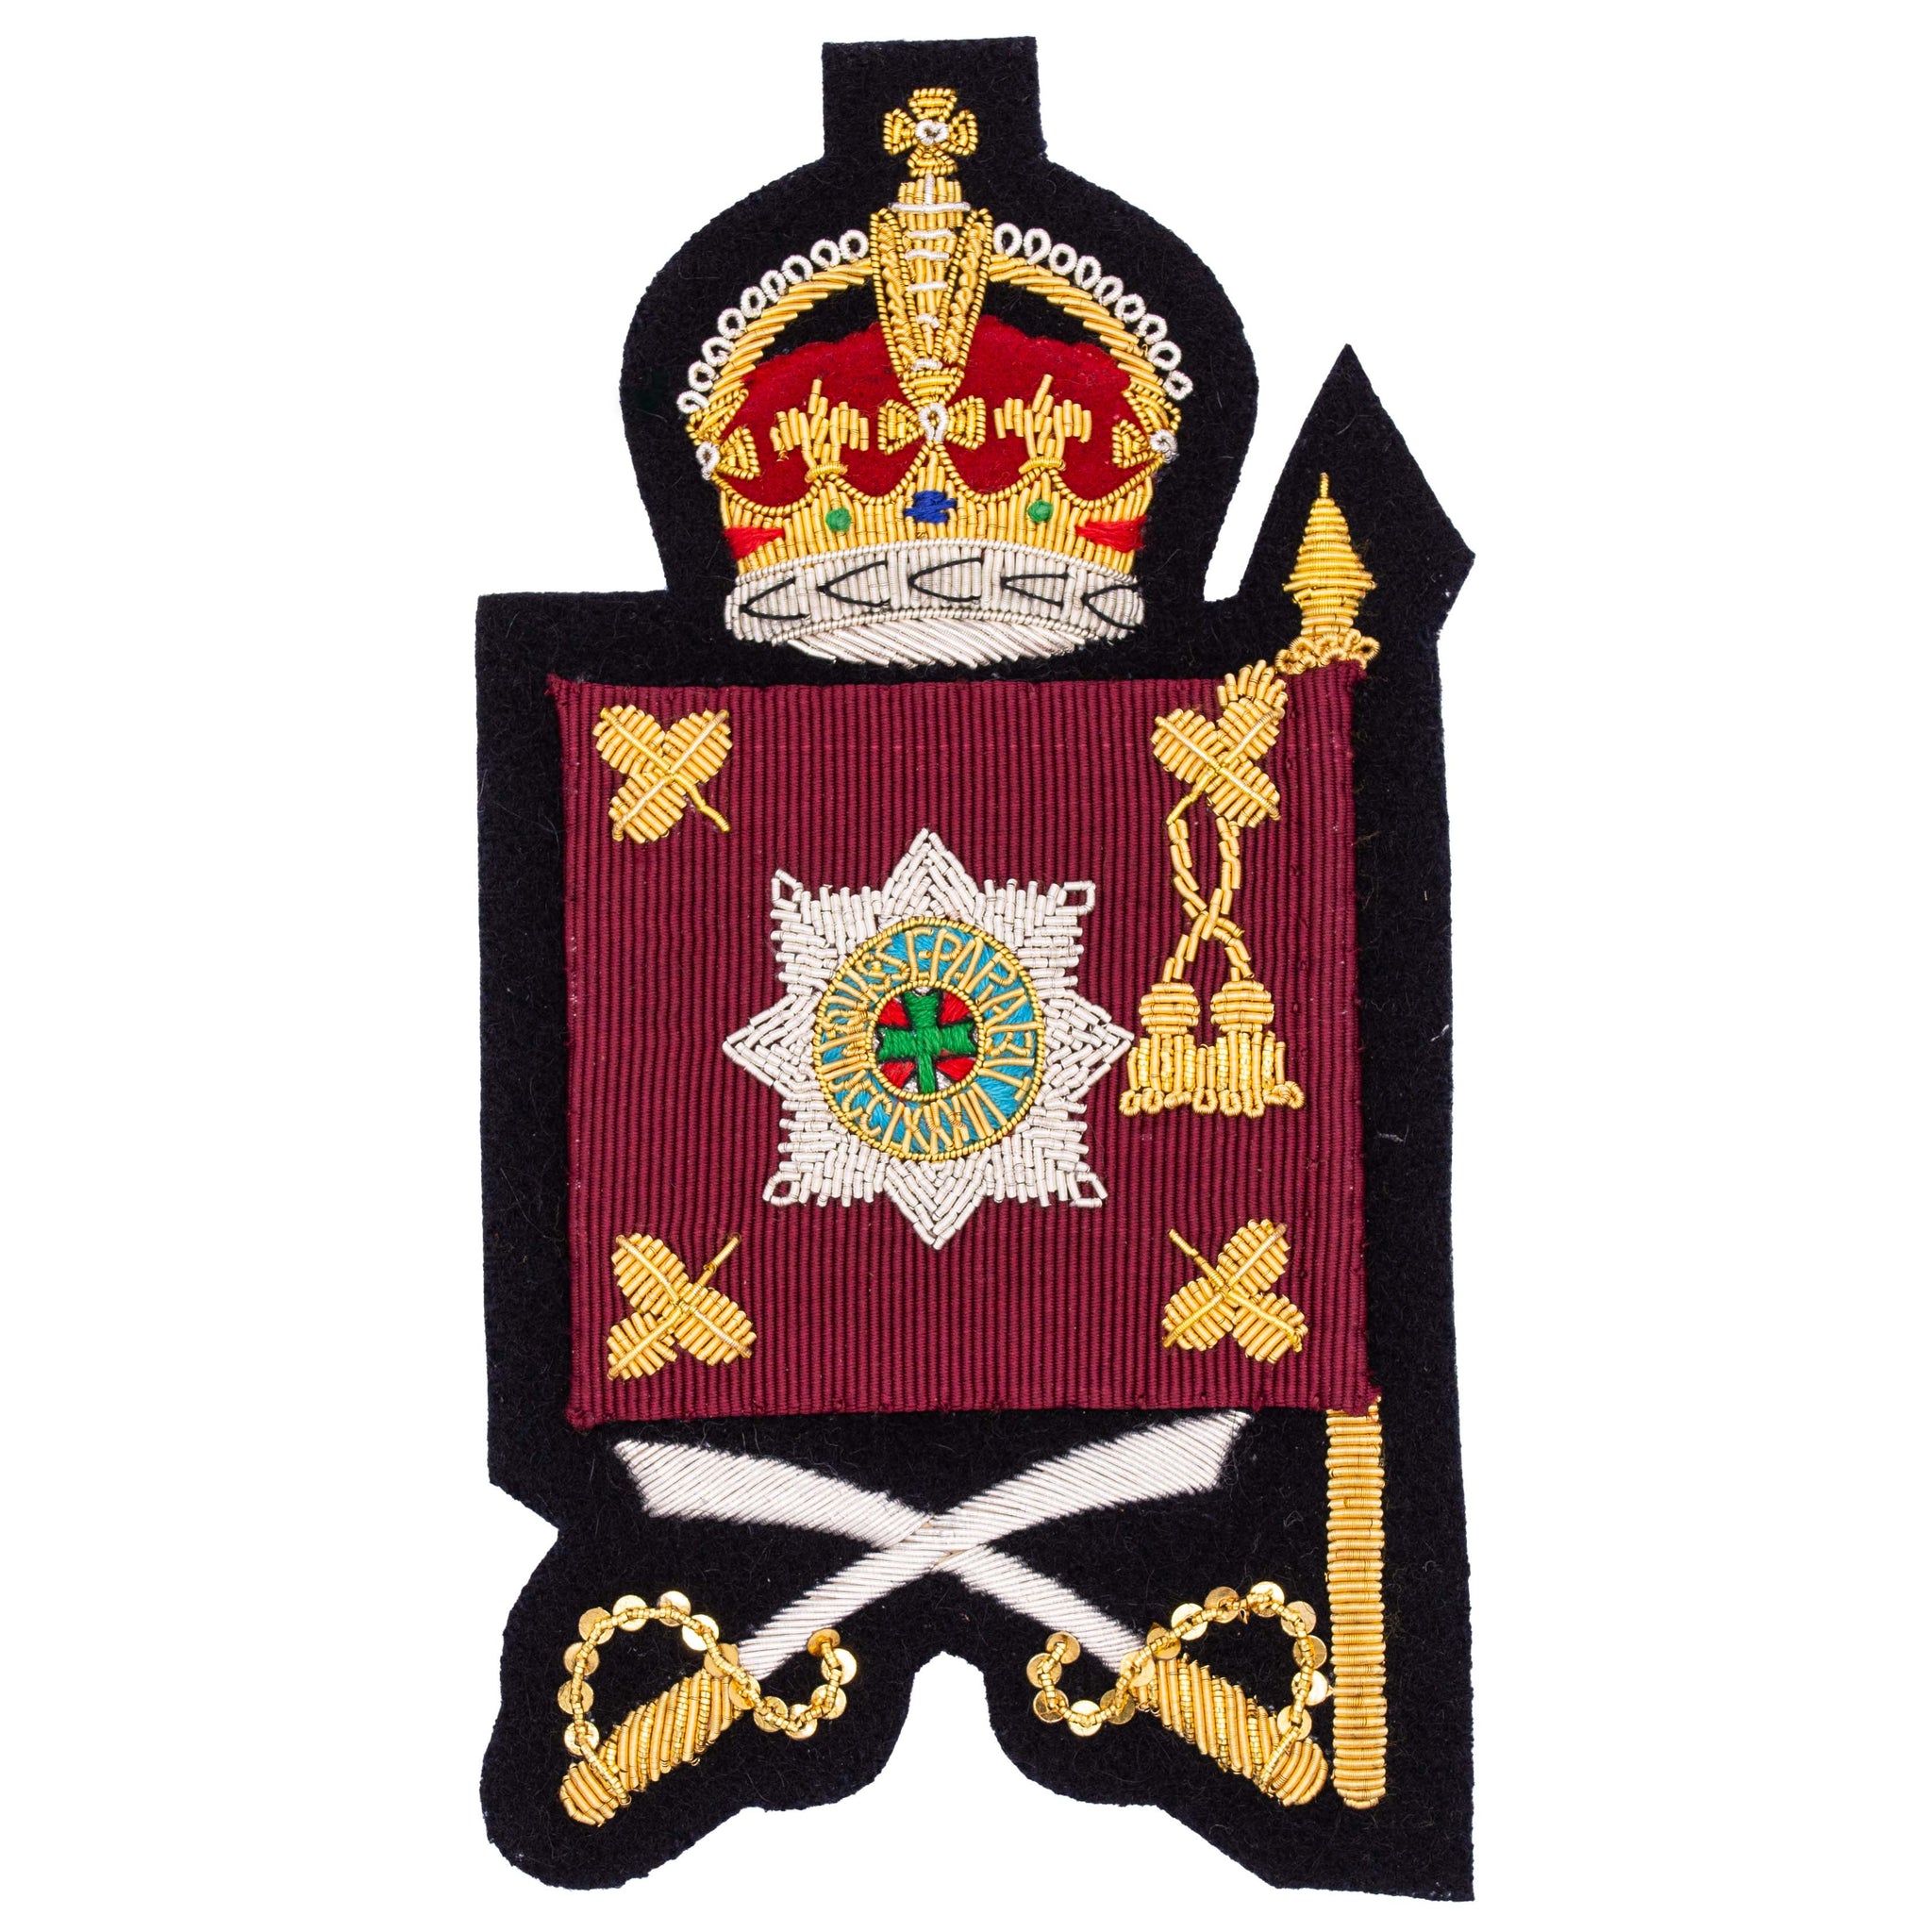 (King's Crown) Colour Sergeants and Company Quartermaster Sergeants  Rank Household Division Irish Guards British Army Badge